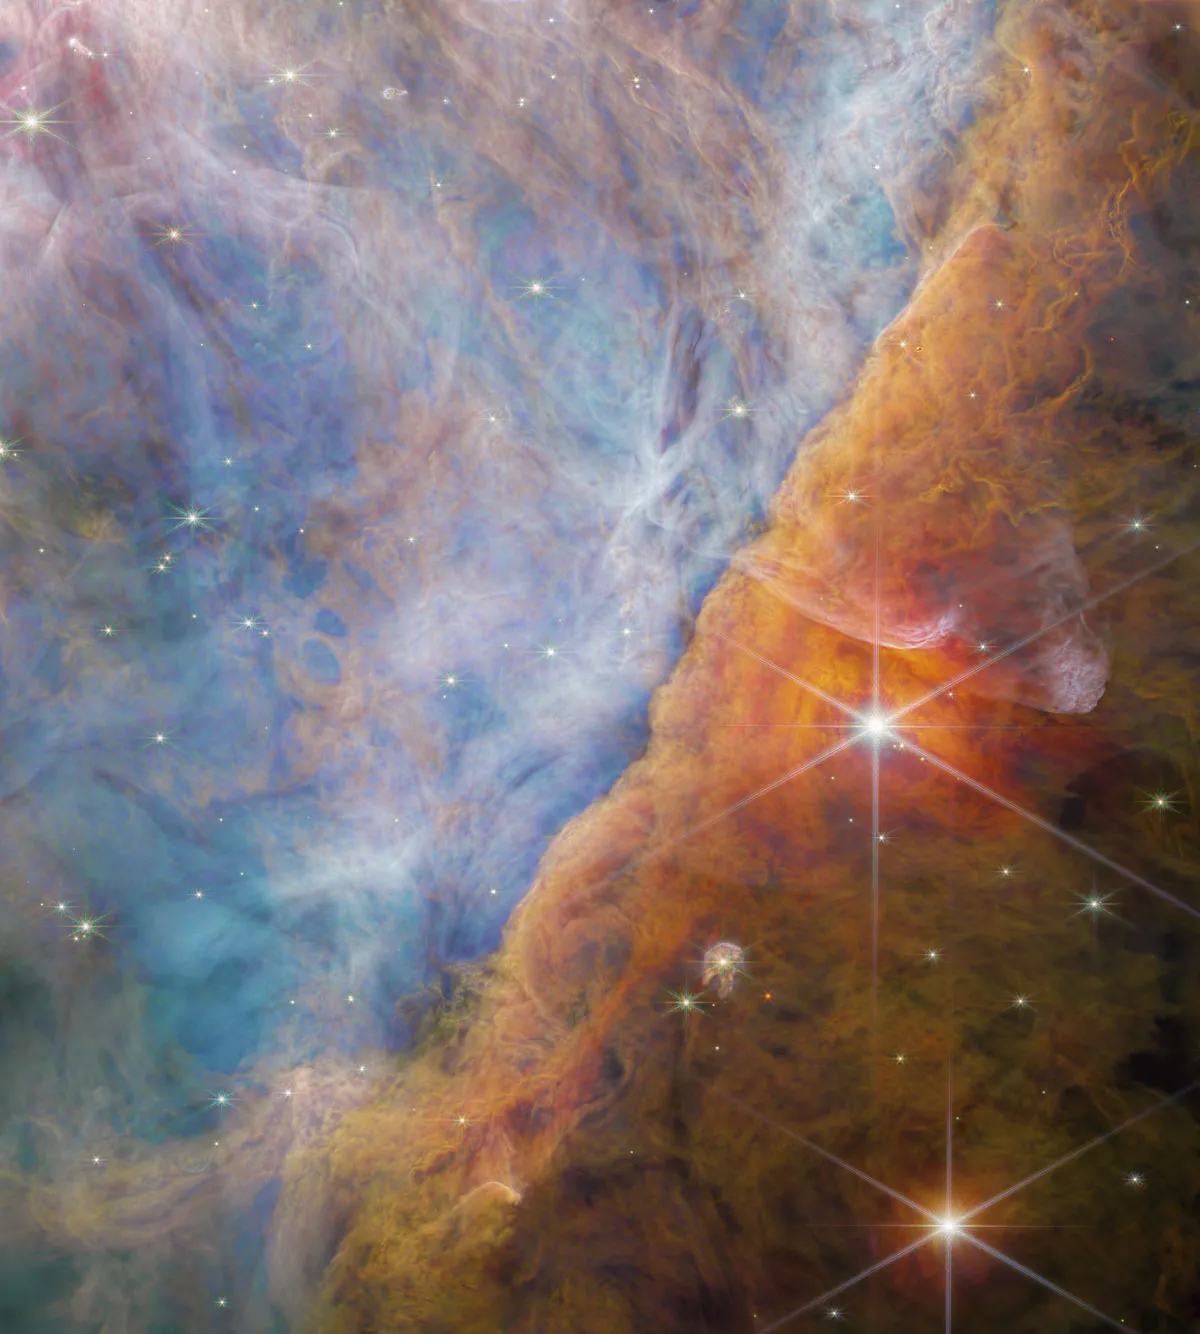 The Orion Bar region space nebula, pictured by the James Webb Space Telescope